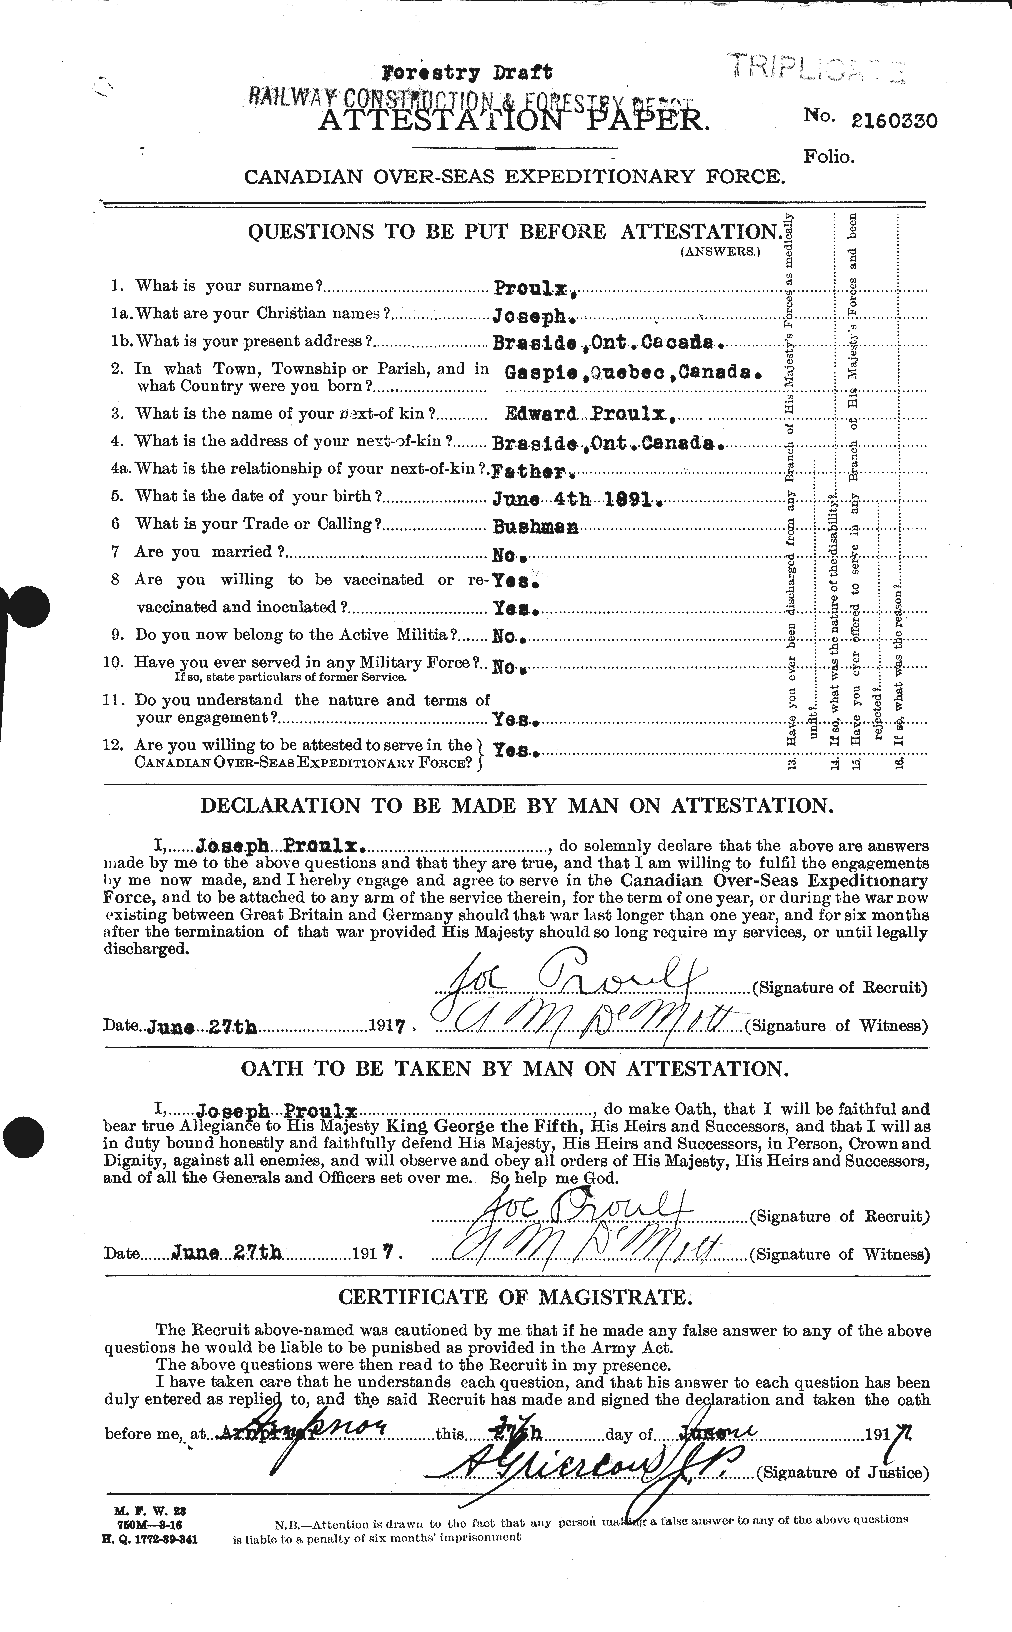 Personnel Records of the First World War - CEF 591601a